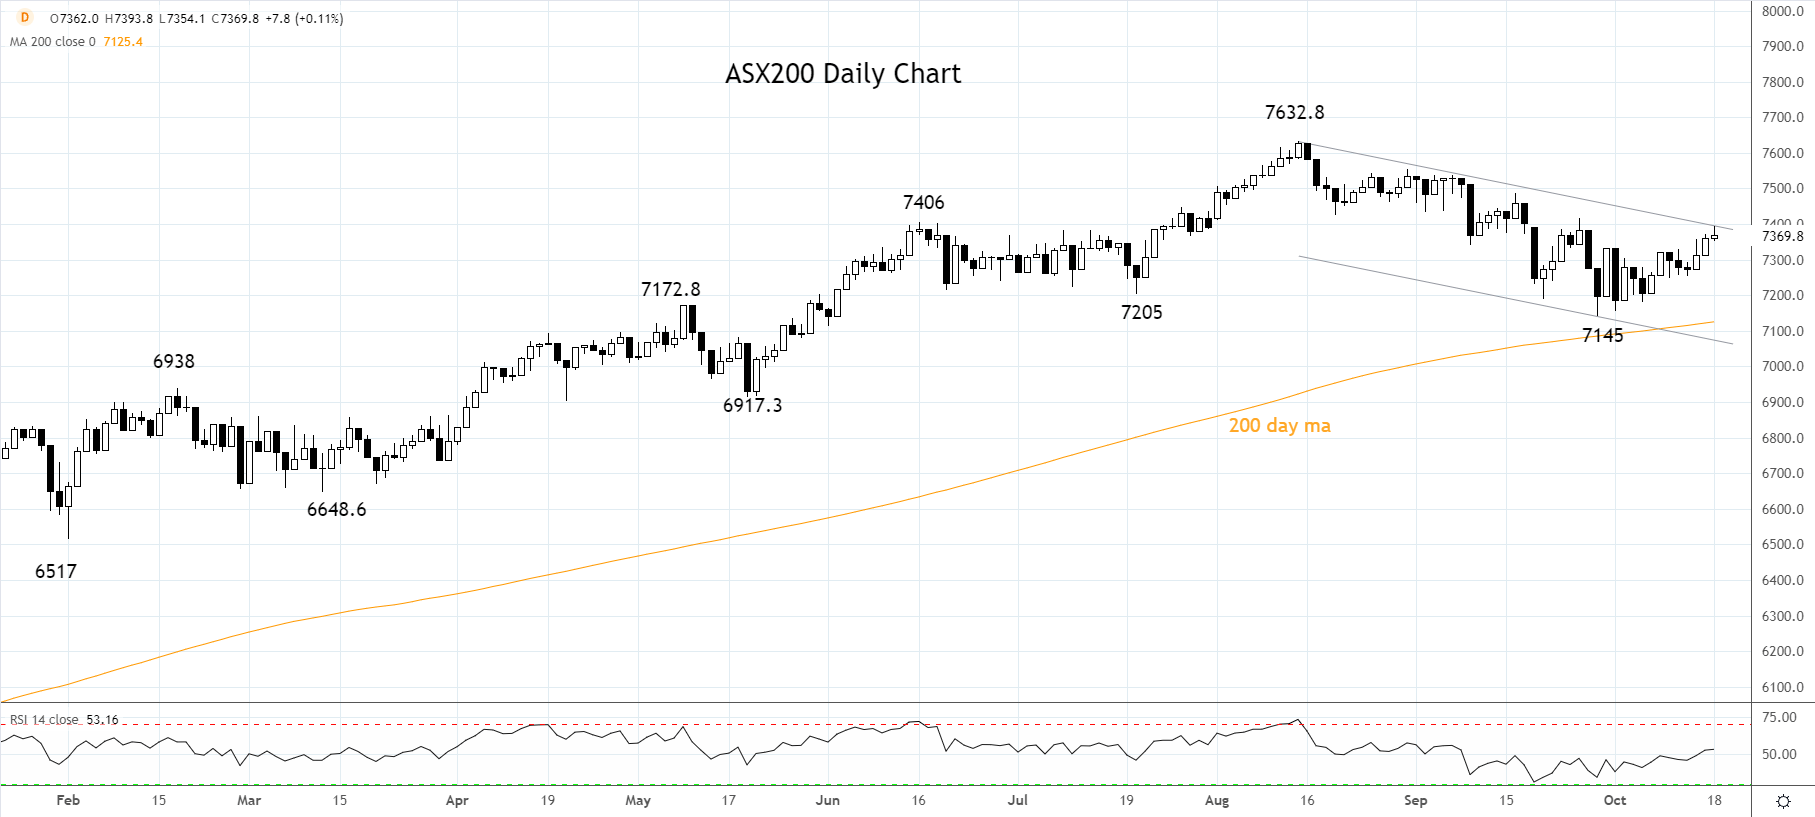 ASX200 Daily chart 18th of October